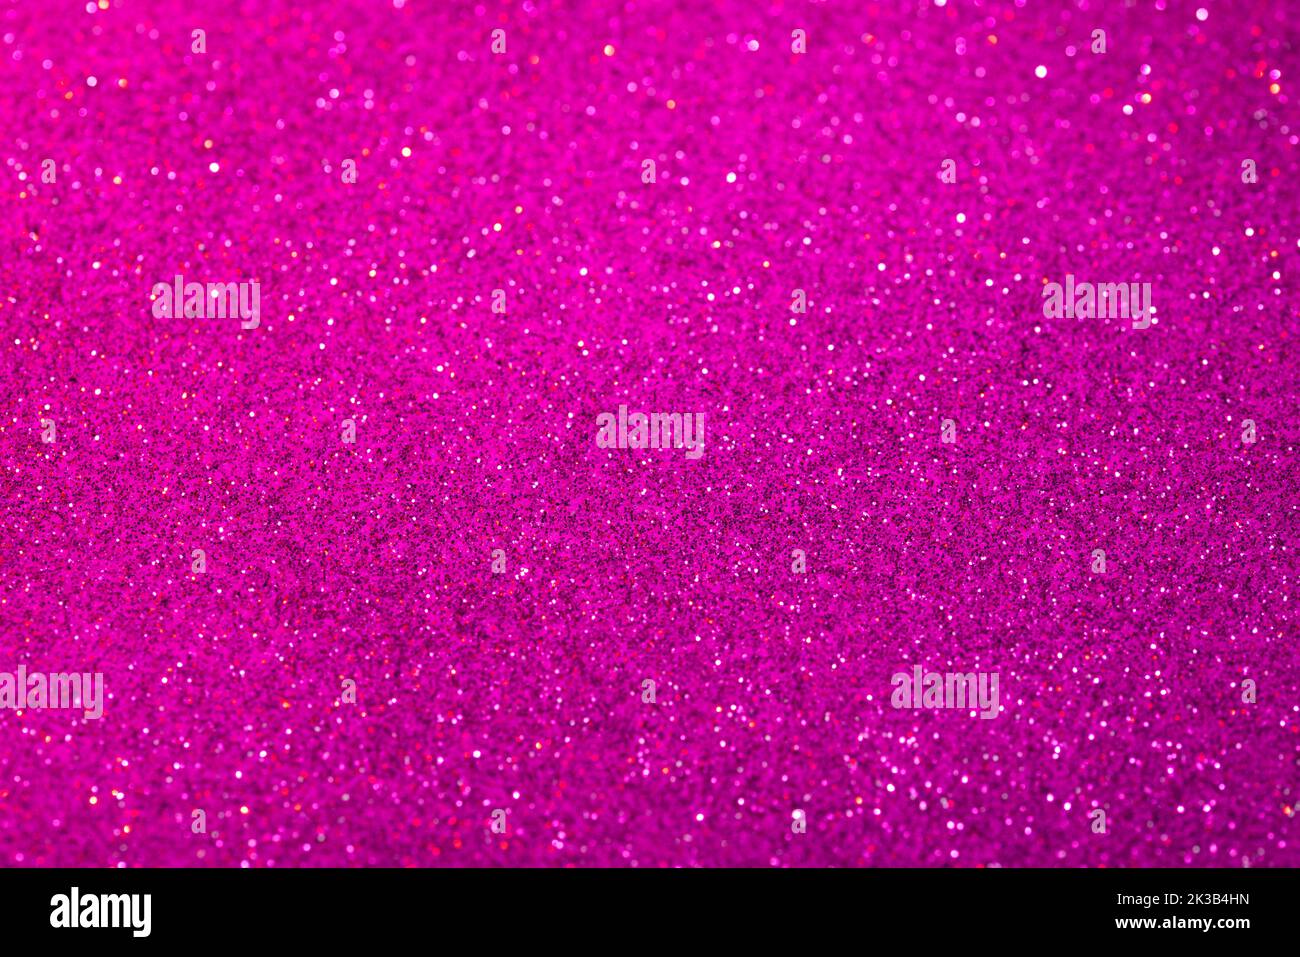 Abstract background with shiny glitter surface Stock Photo